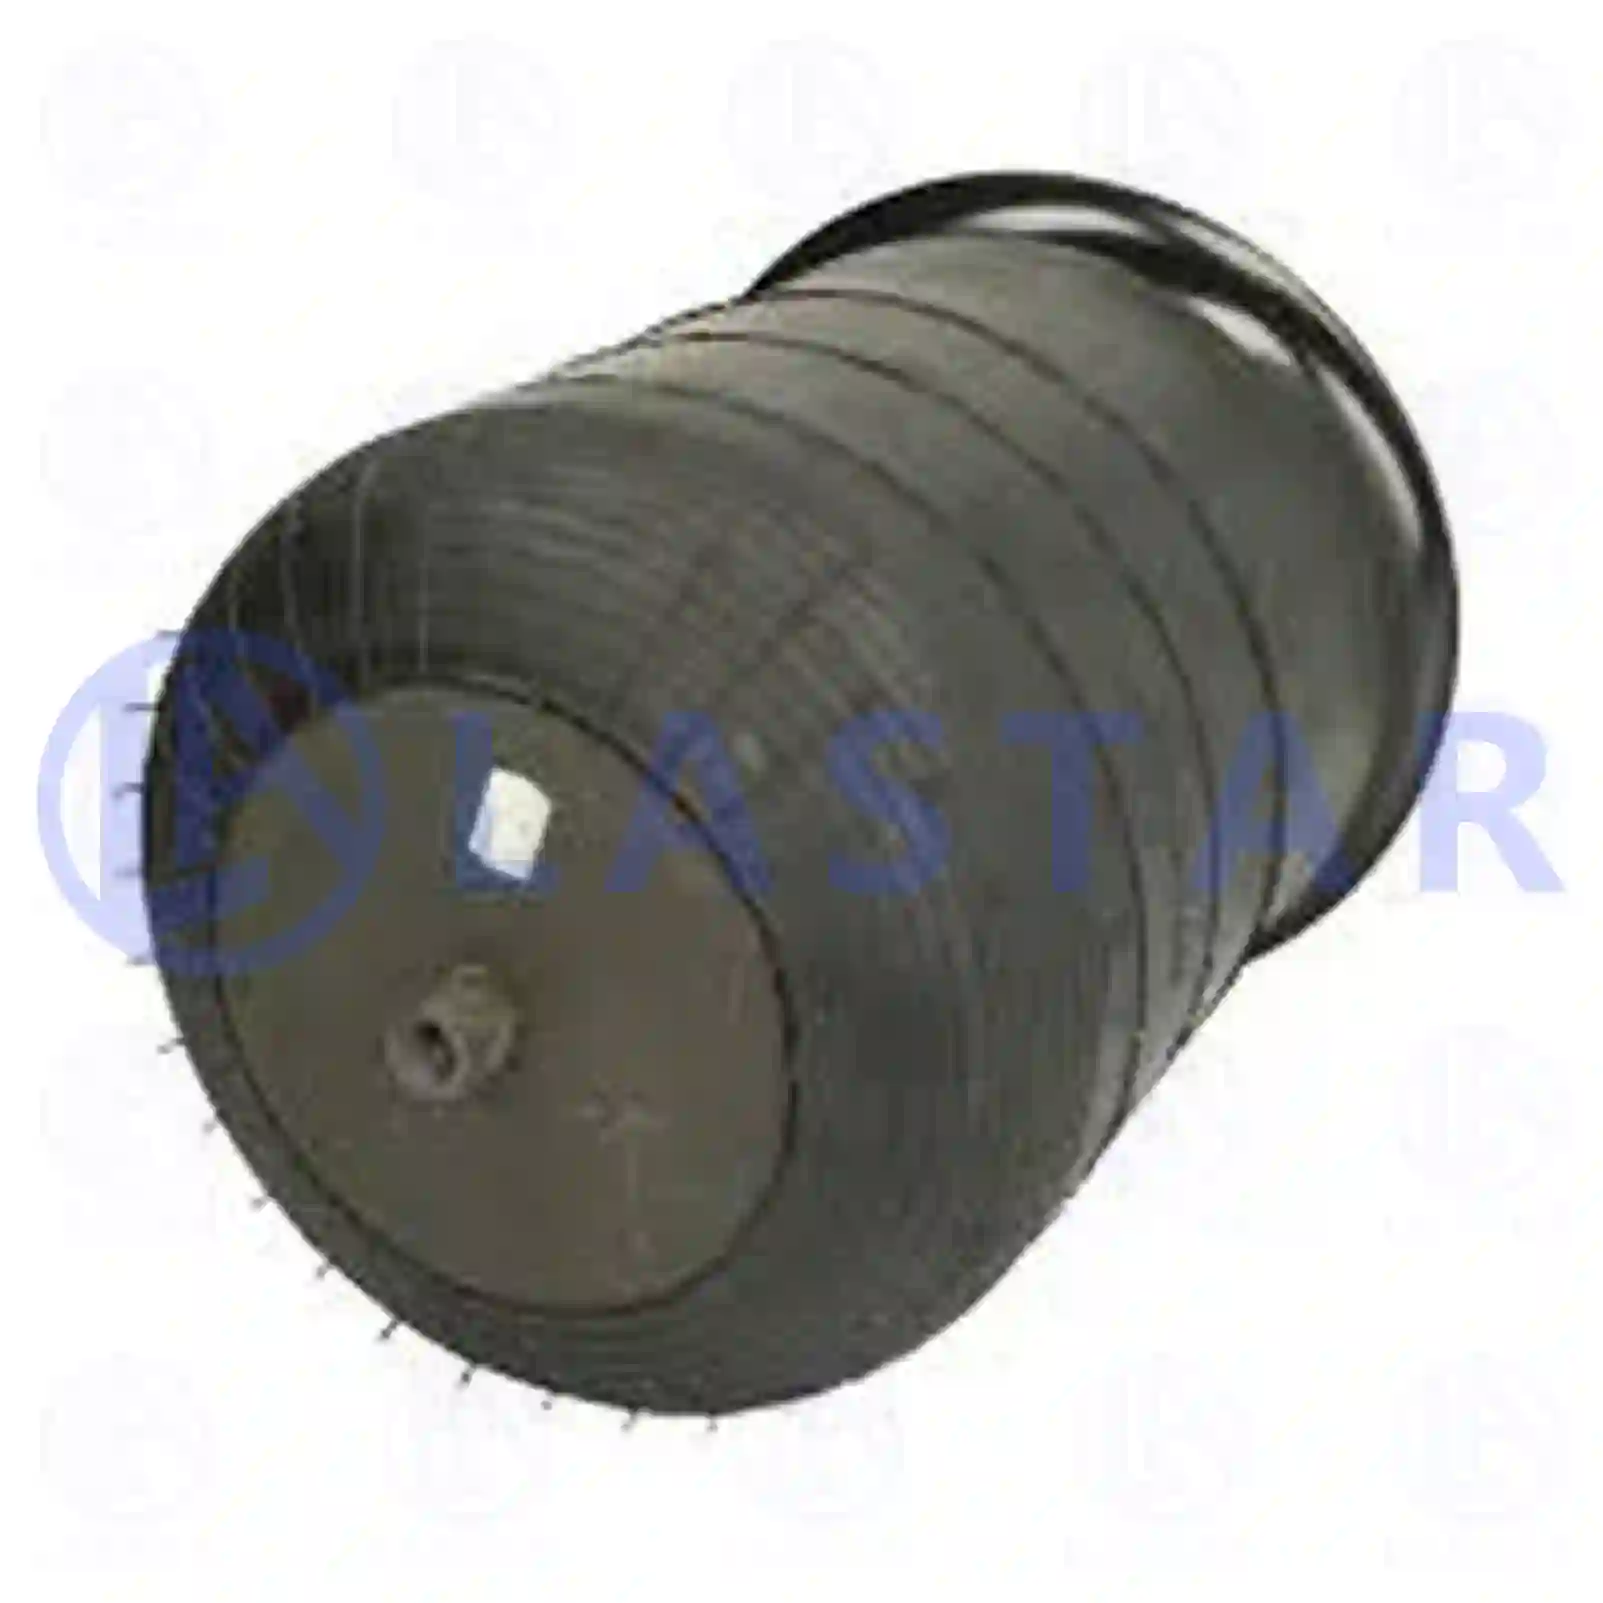 Air spring, with steel piston, 77727206, 9423200117, 942320011710, 9423204321, 9423270101, MLF7164, ZG40770-0008 ||  77727206 Lastar Spare Part | Truck Spare Parts, Auotomotive Spare Parts Air spring, with steel piston, 77727206, 9423200117, 942320011710, 9423204321, 9423270101, MLF7164, ZG40770-0008 ||  77727206 Lastar Spare Part | Truck Spare Parts, Auotomotive Spare Parts